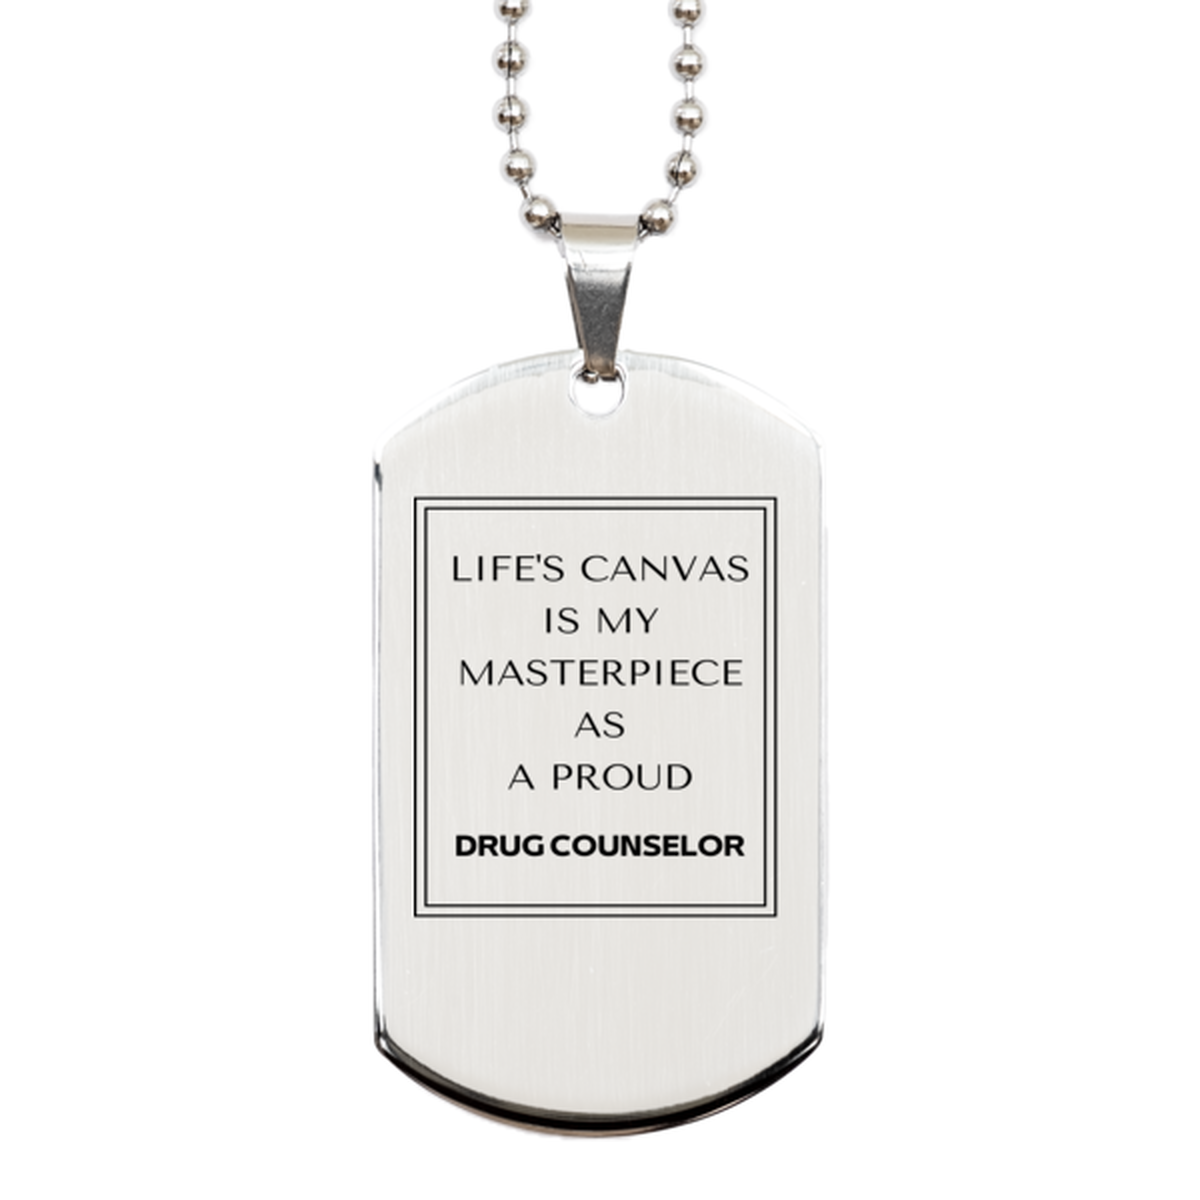 Proud Drug Counselor Gifts, Life's canvas is my masterpiece, Epic Birthday Christmas Unique Silver Dog Tag For Drug Counselor, Coworkers, Men, Women, Friends